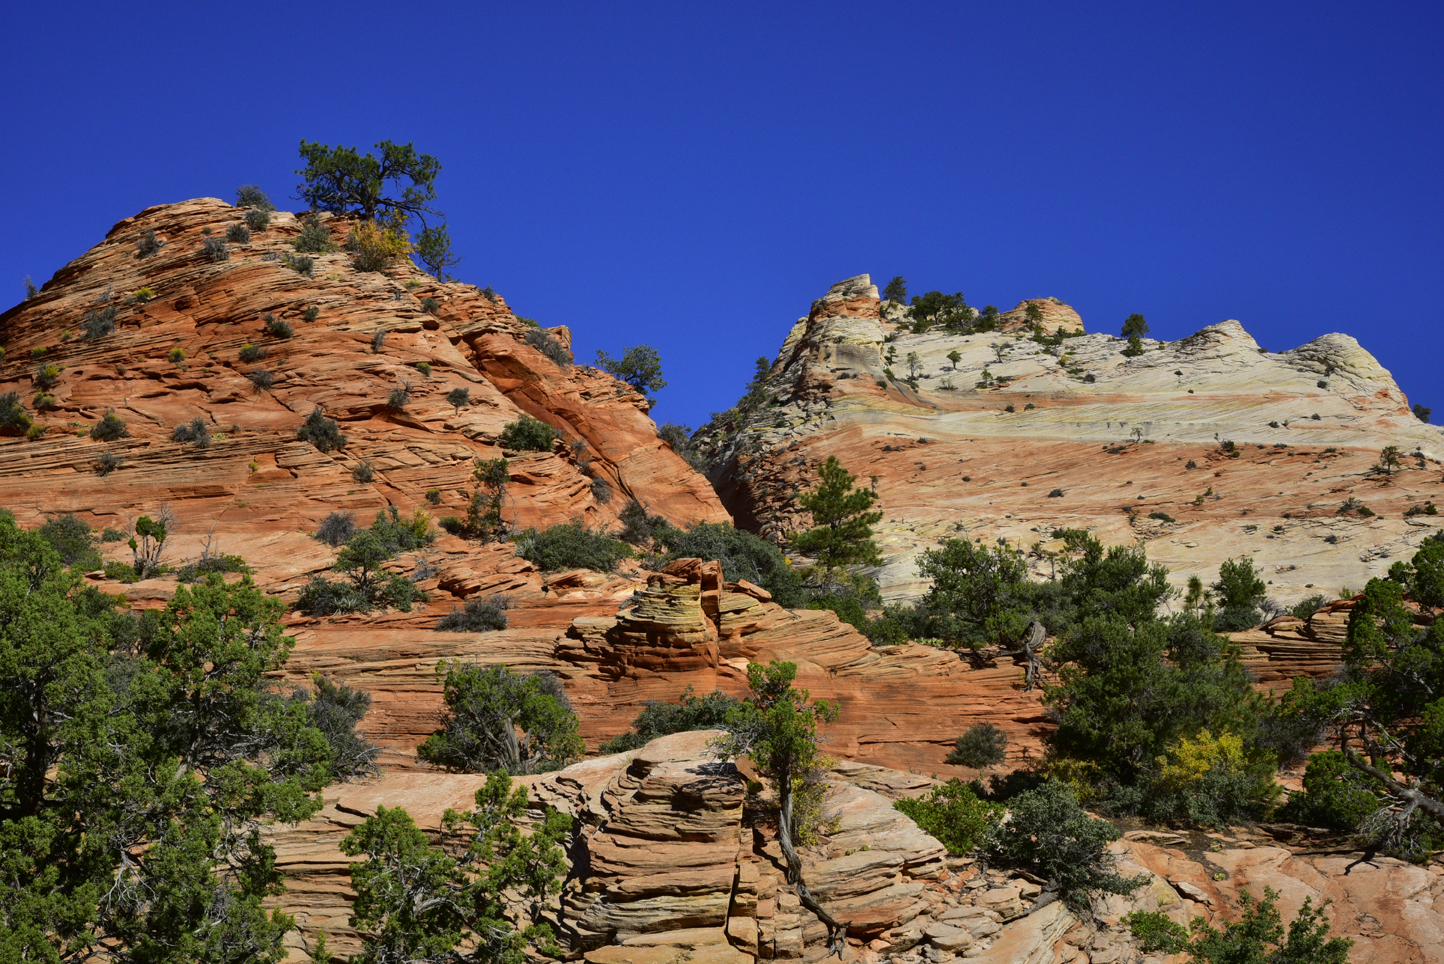 Sandstone formations  -  Zion-Mt. Carmel Hwy (east of tunnel), Zion National Park, Utah